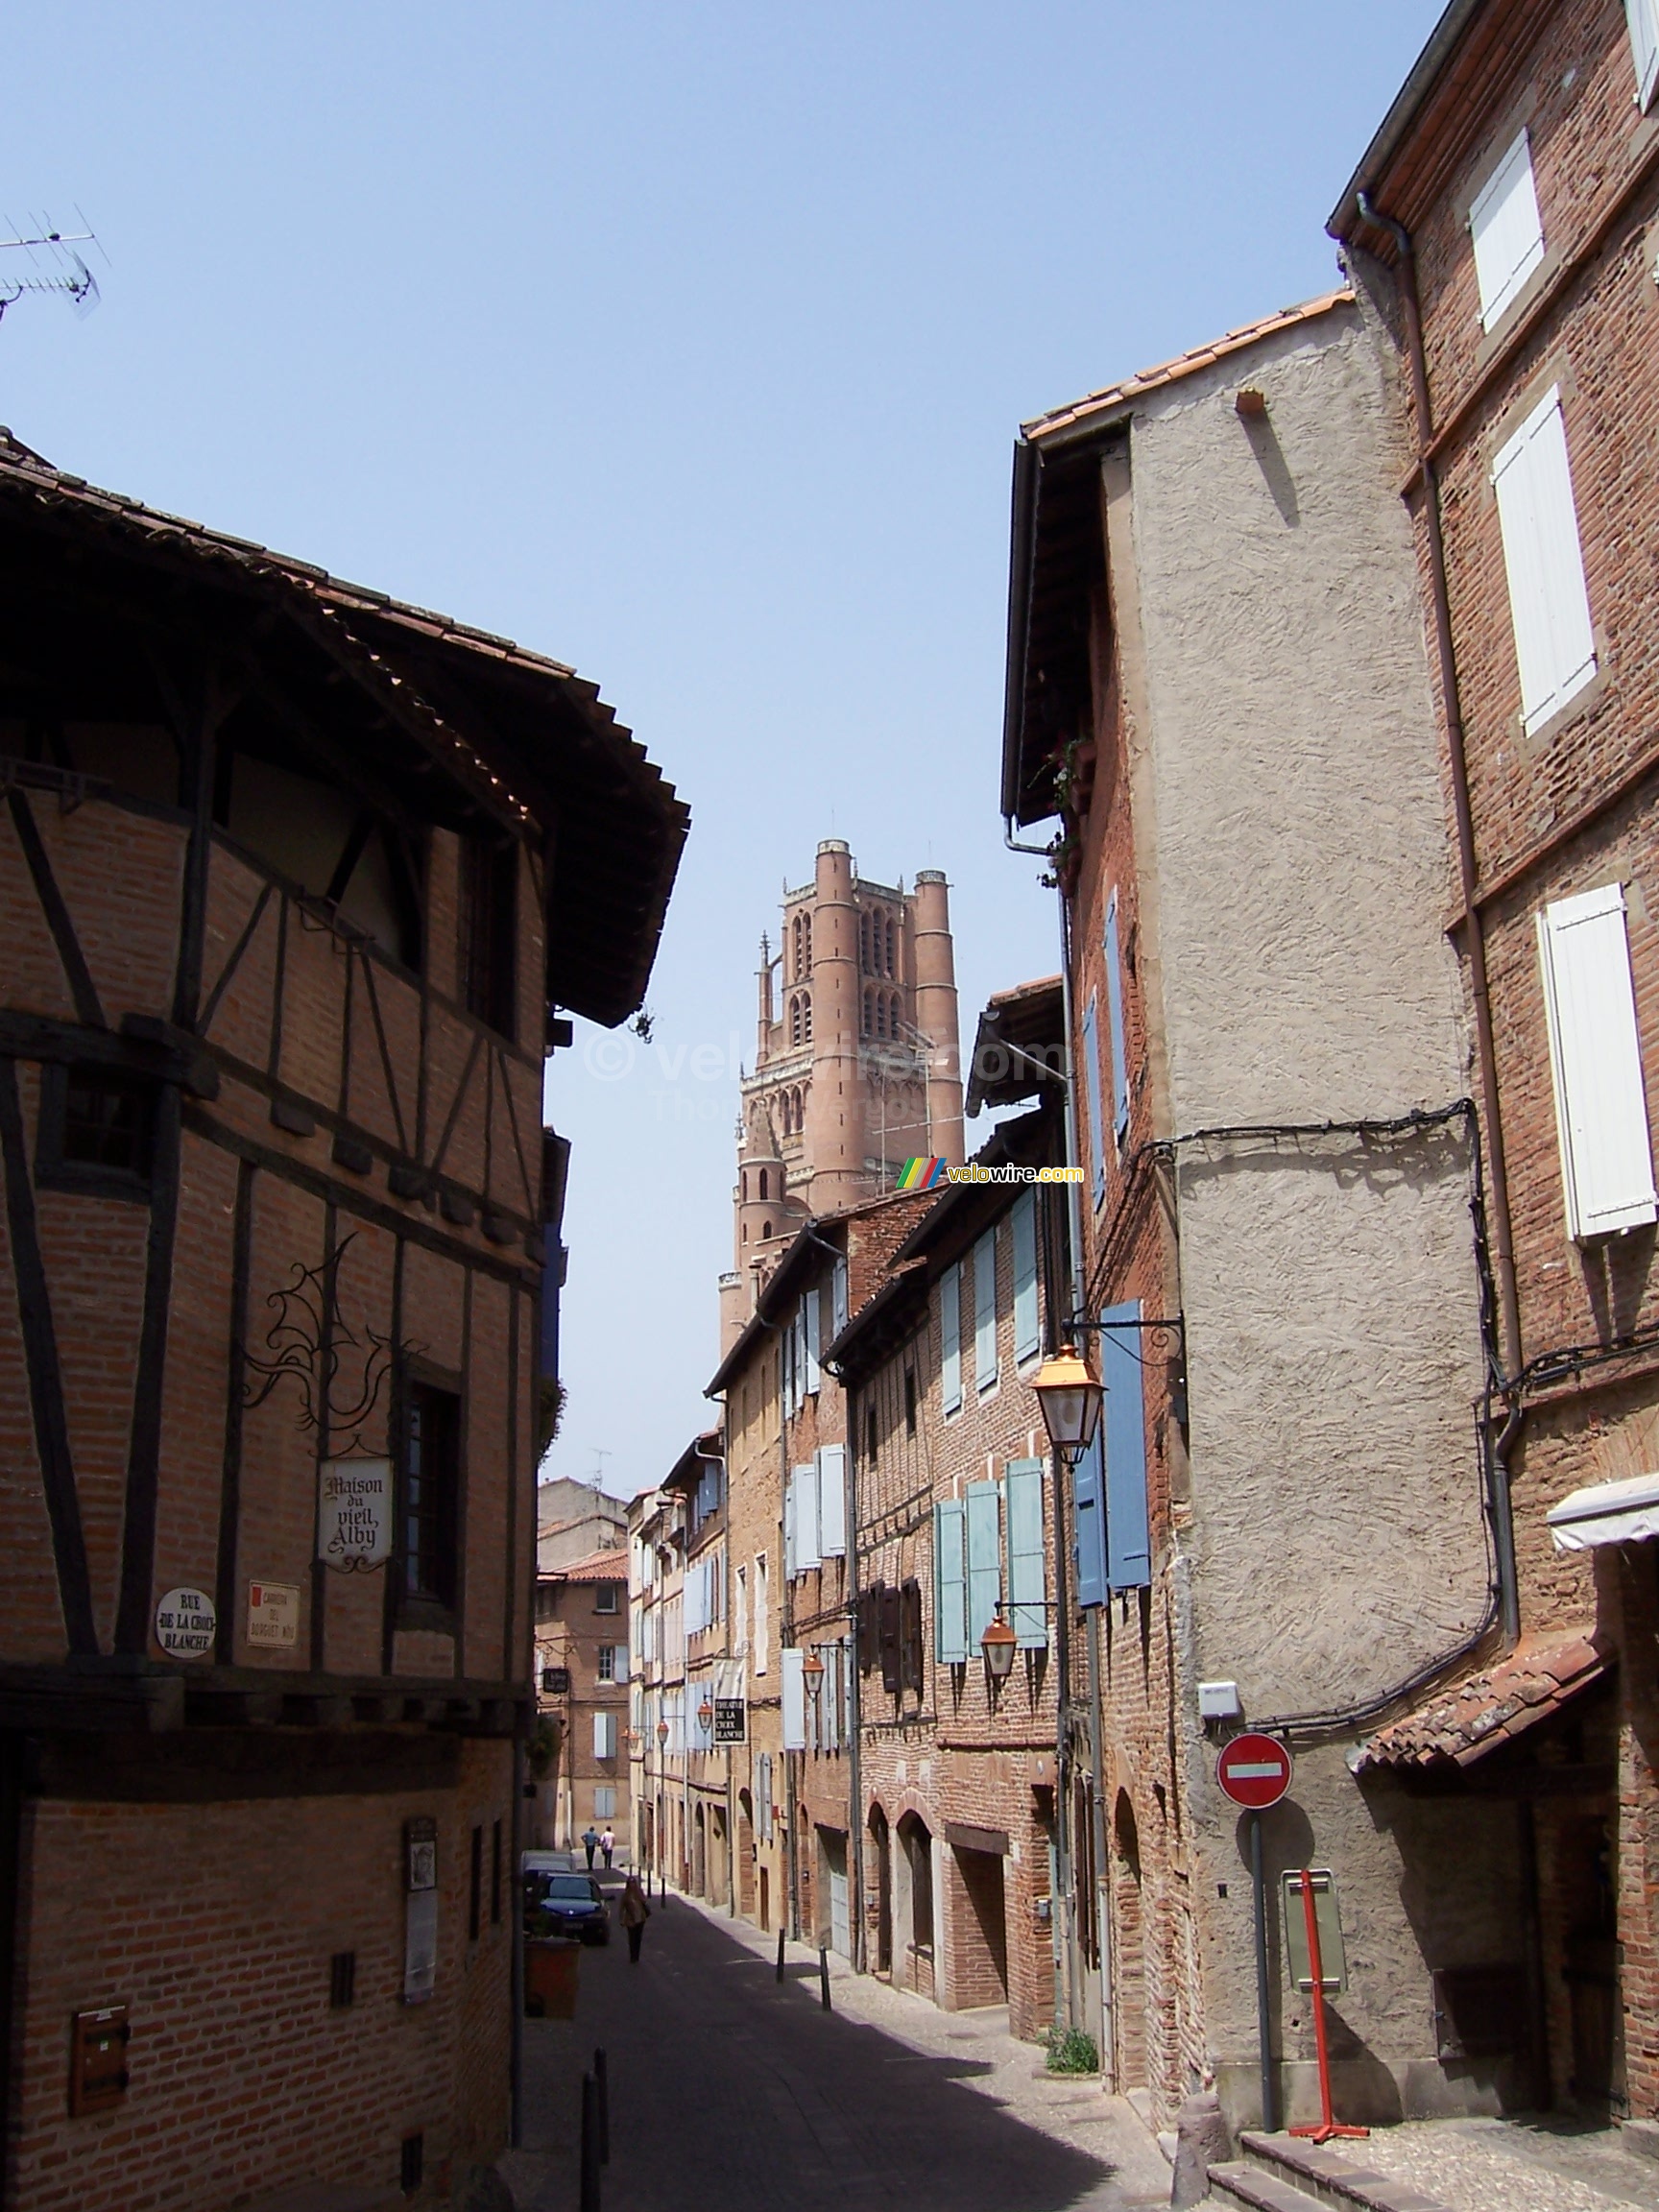 A nice street and the Sainte Ccile cathedral